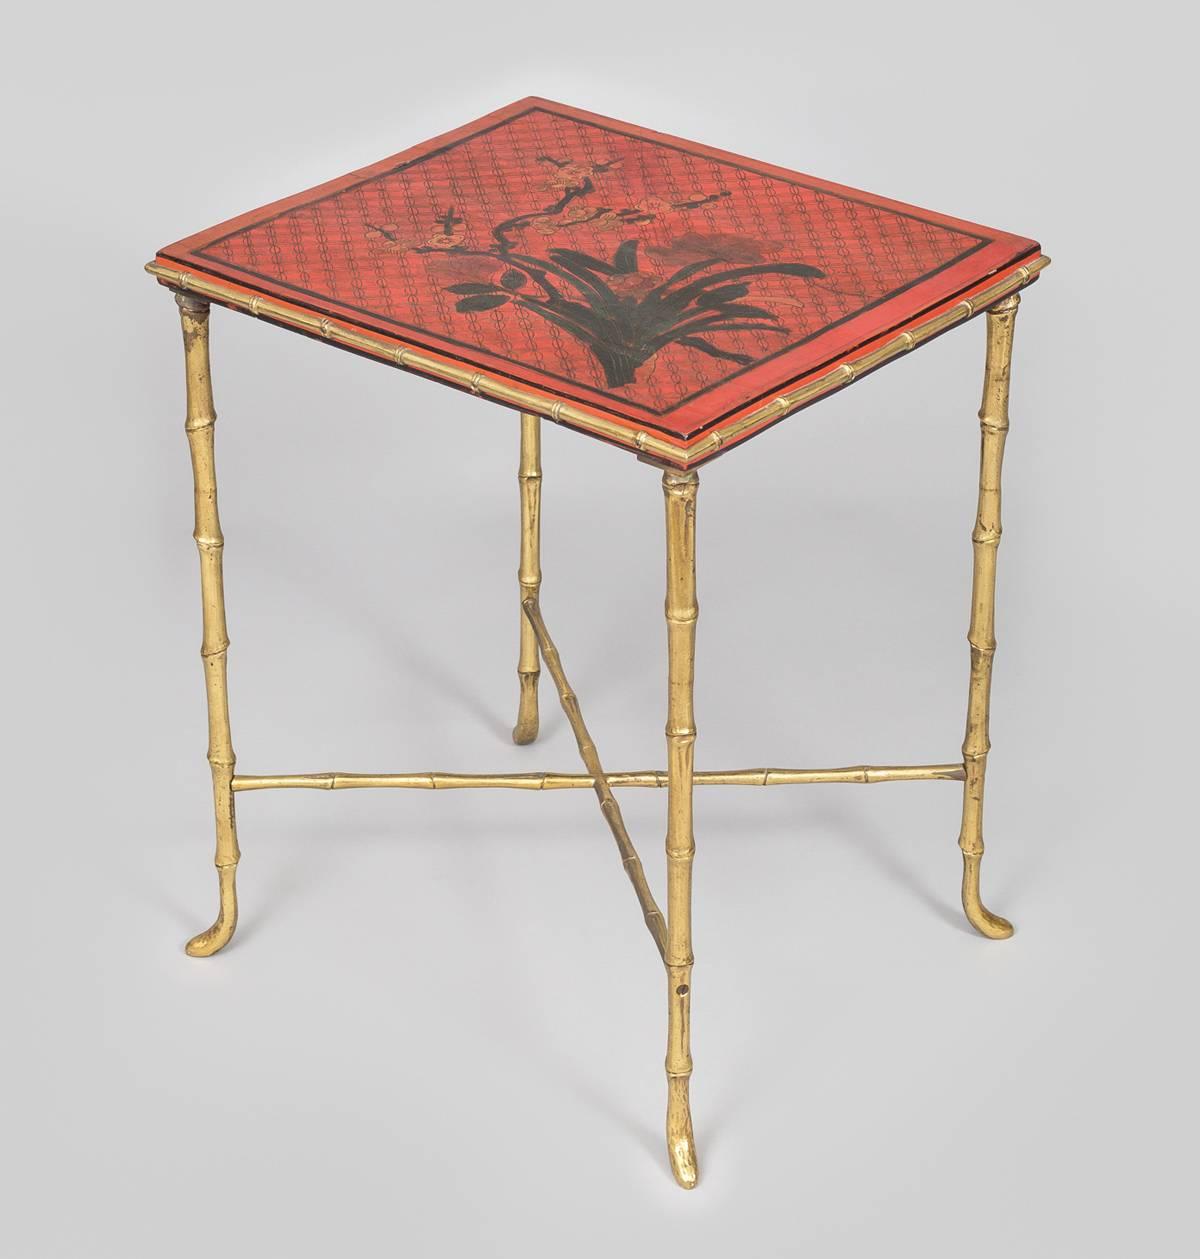 Harlequin pair of red lacquered side tables composed of parts from a panel of a Chinese screen, set into gilded metal faux bamboo frames with X-shaped stretchers and legs.  Each panel is of a different design.  Can also be used as individual coffee